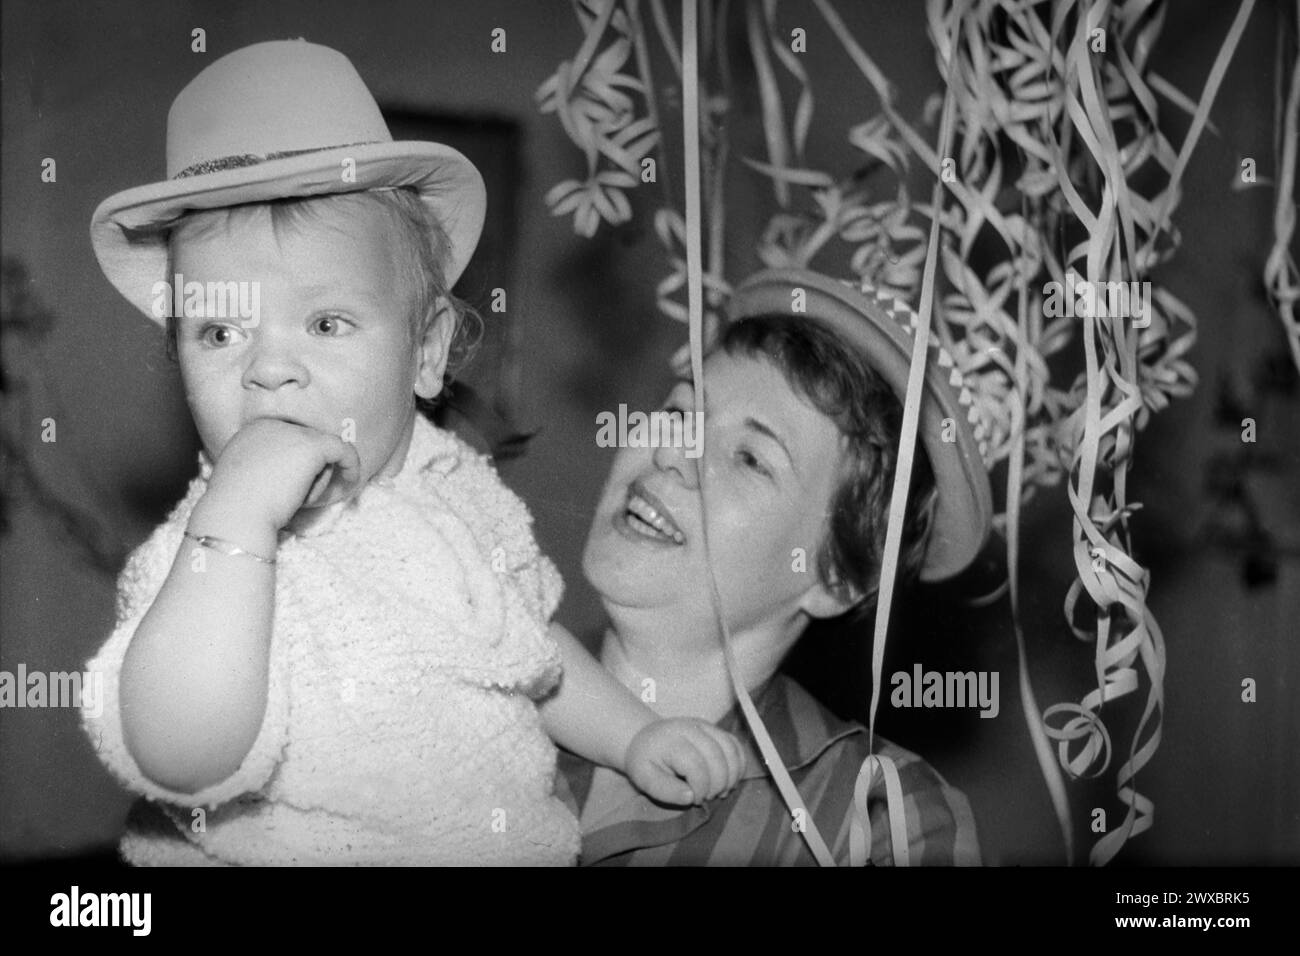 Silvester GER, ca. 1950, Silvester, Party mit Kind *** New Years Eve GER, ca 1950, New Years Eve, Party with child Stock Photo